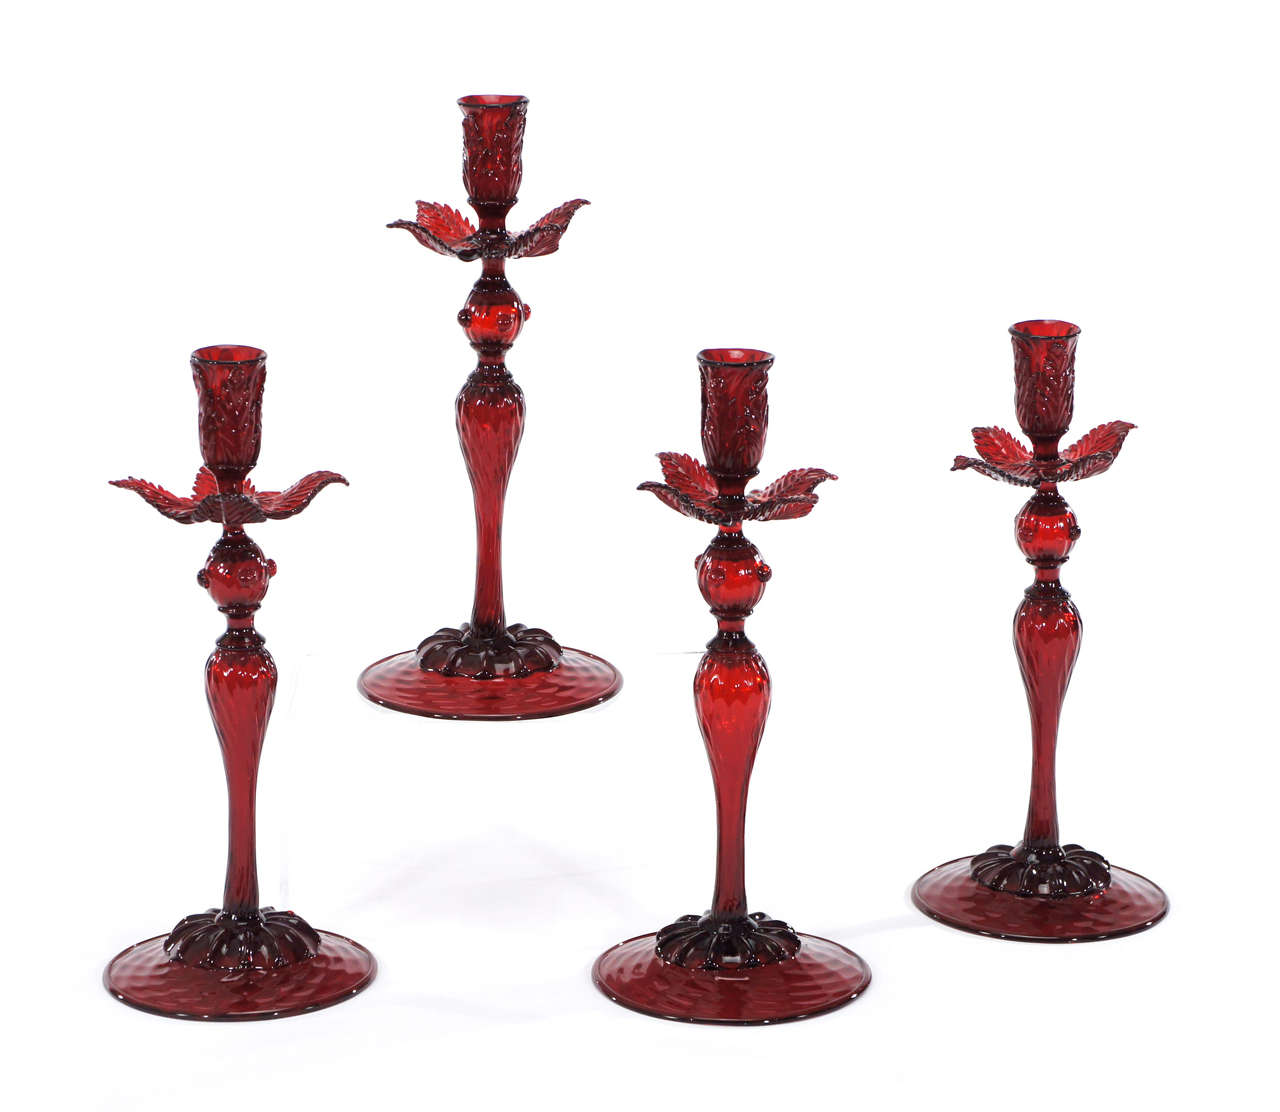 An amazing grouping of 4 matching candlesticks for a dramatic table setting. Two sets of 2 hand blown ruby glass tall candlesticks with quilted optic decoration in the foot, ribbed up to the connectors with applied leaves forming the bobeches.